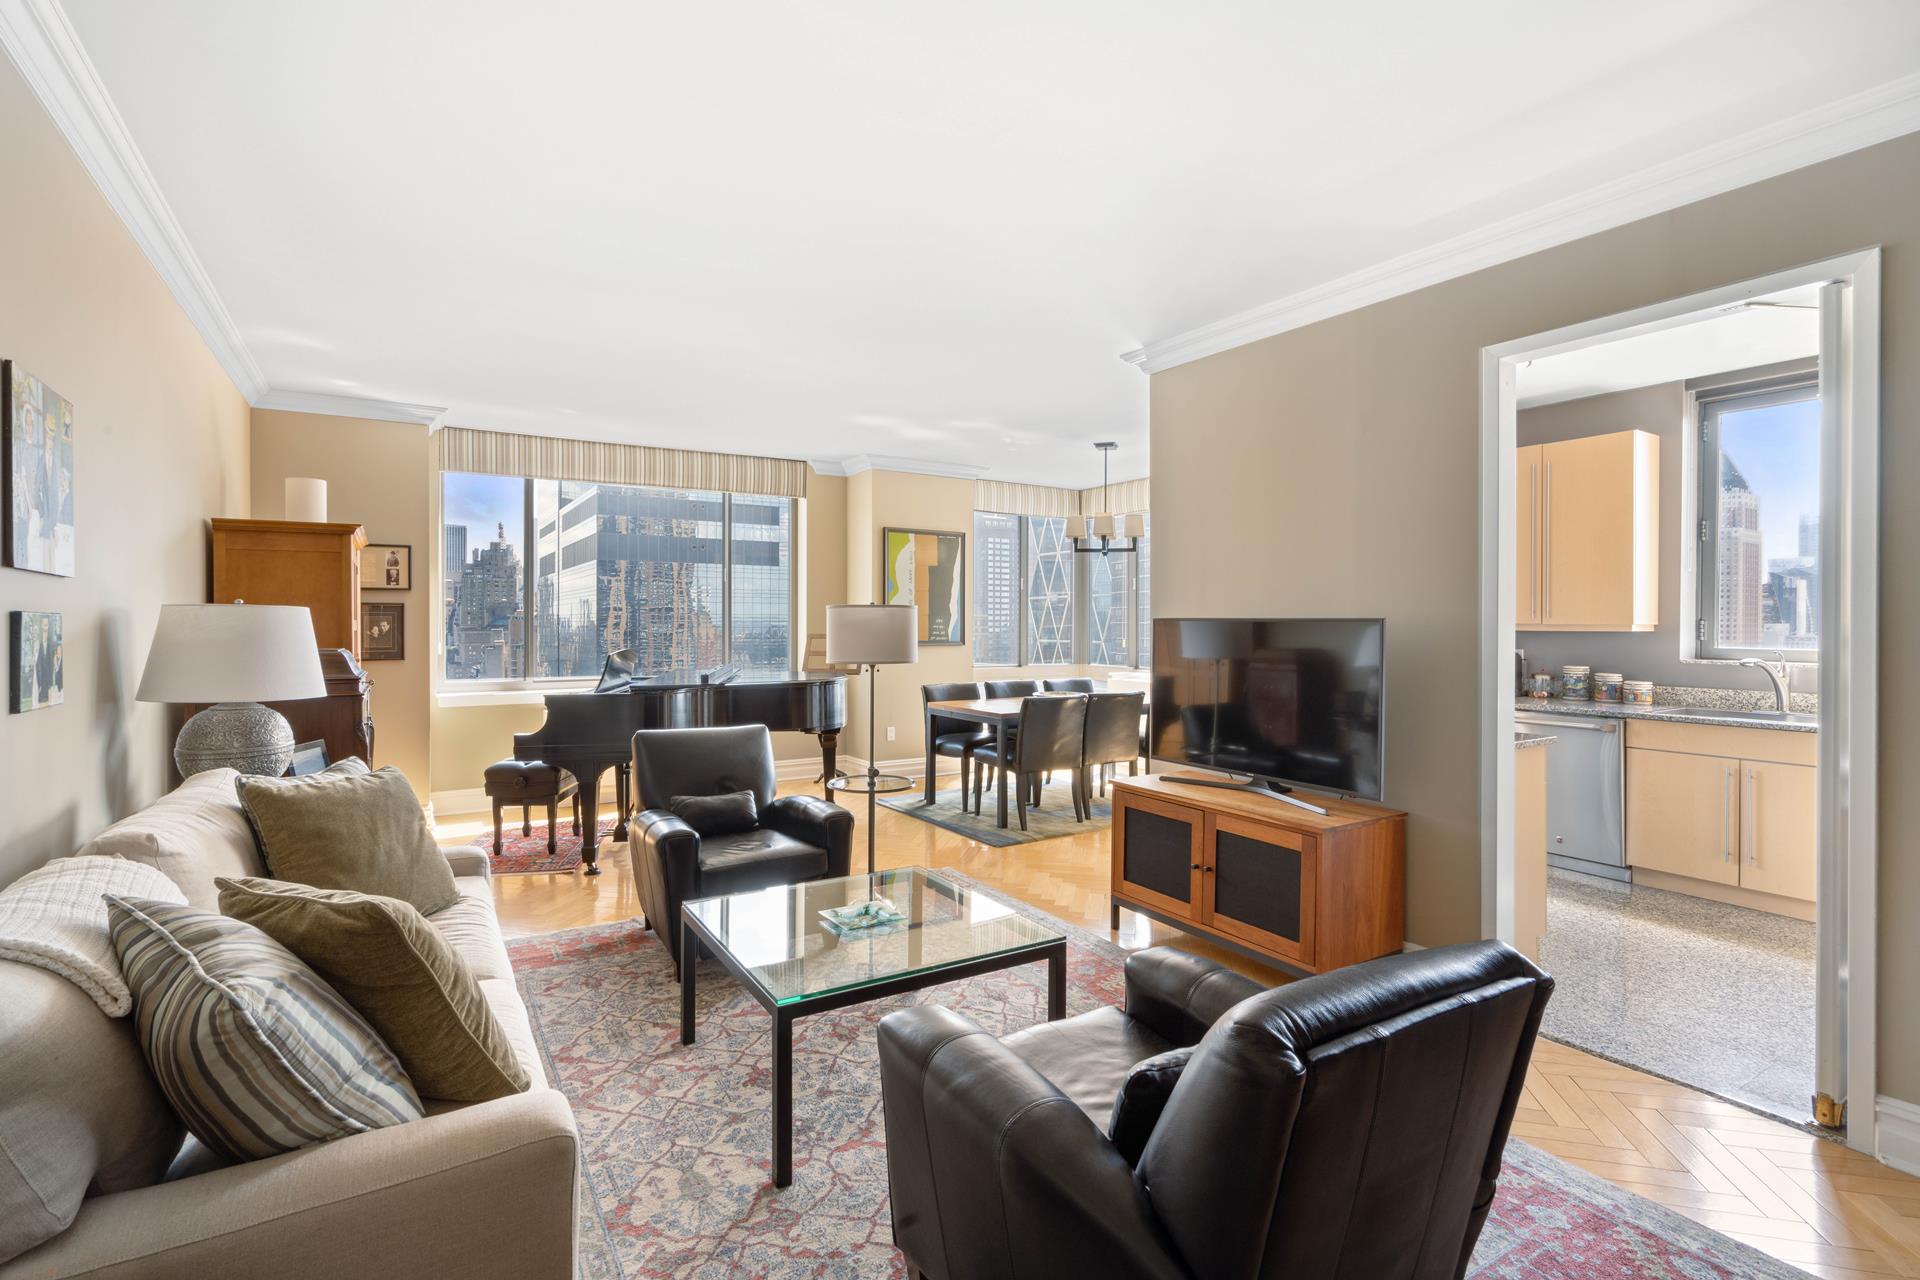 2 Columbus Avenue 29C, Lincoln Sq, Upper West Side, NYC - 2 Bedrooms  
2.5 Bathrooms  
5 Rooms - 